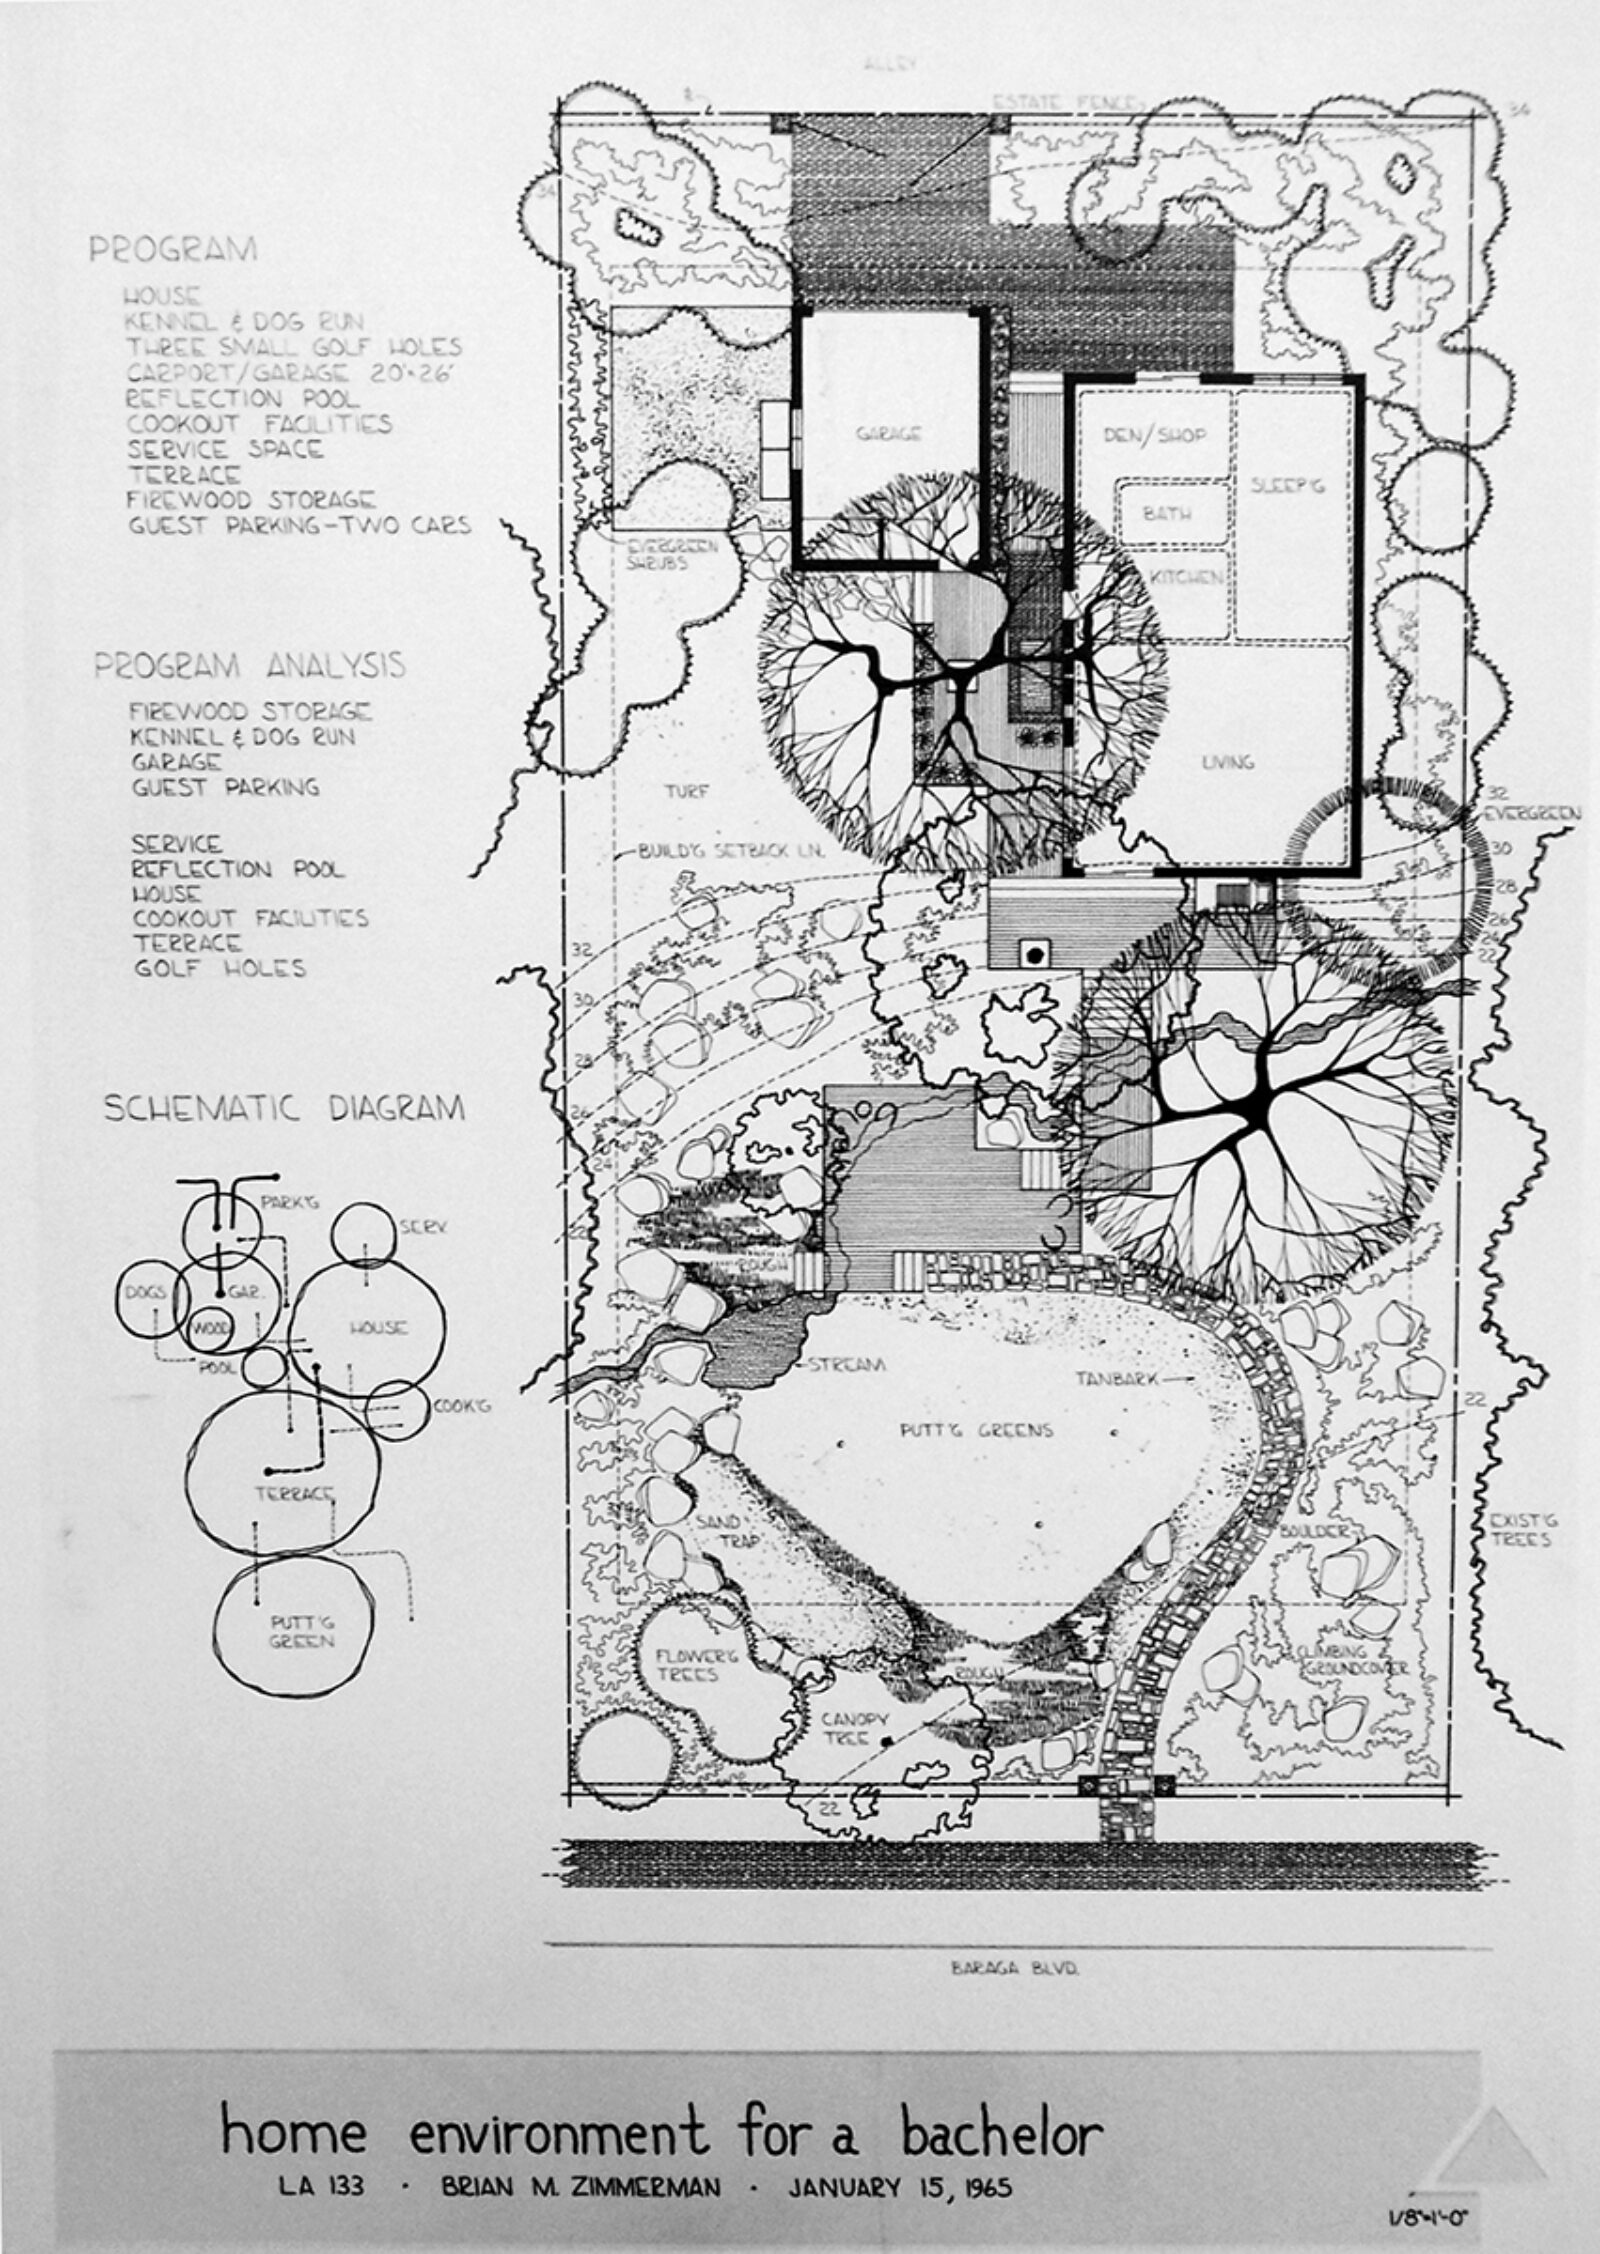 Plan by Brian Zimmerman (BFALA 1967) for a Home Environment for a Bachelor (LA 133)